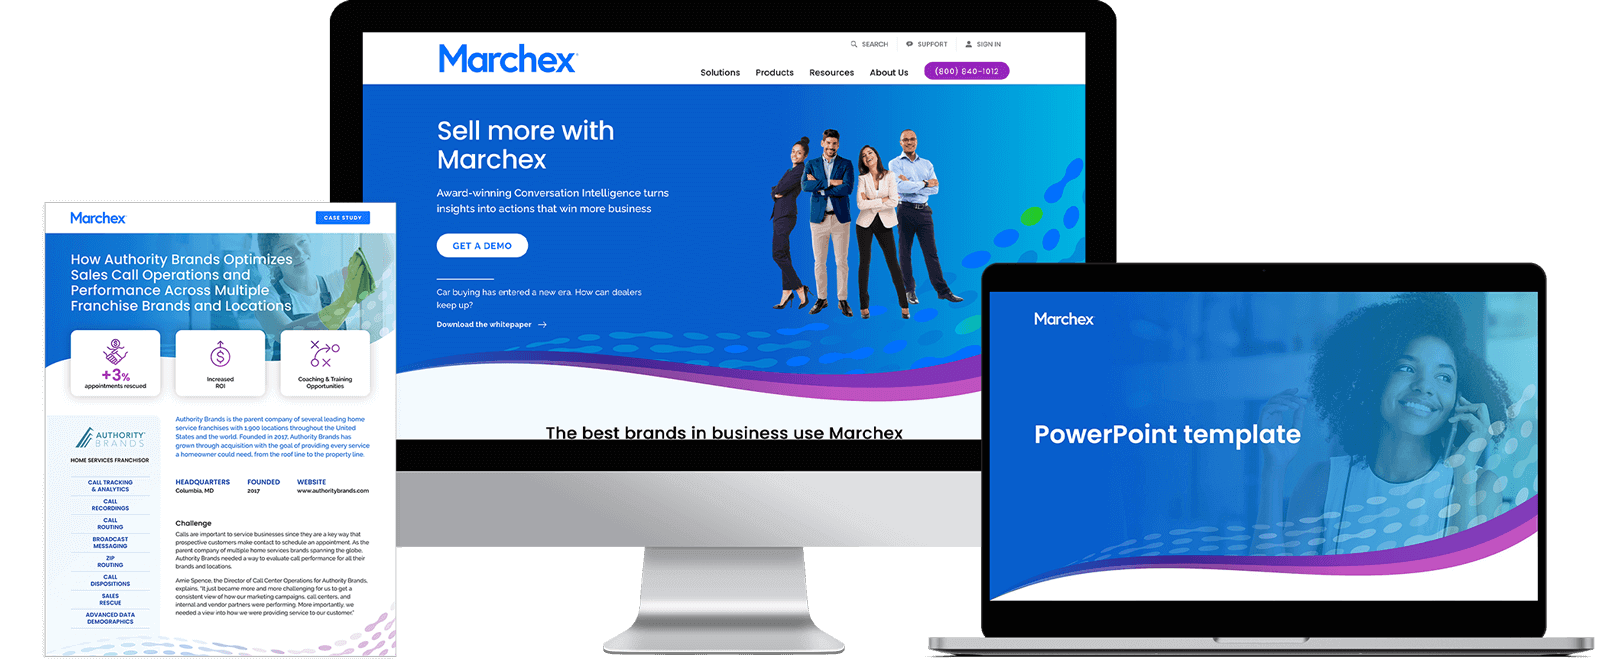 Rebranded Marchex case study, website, and PowerPoint